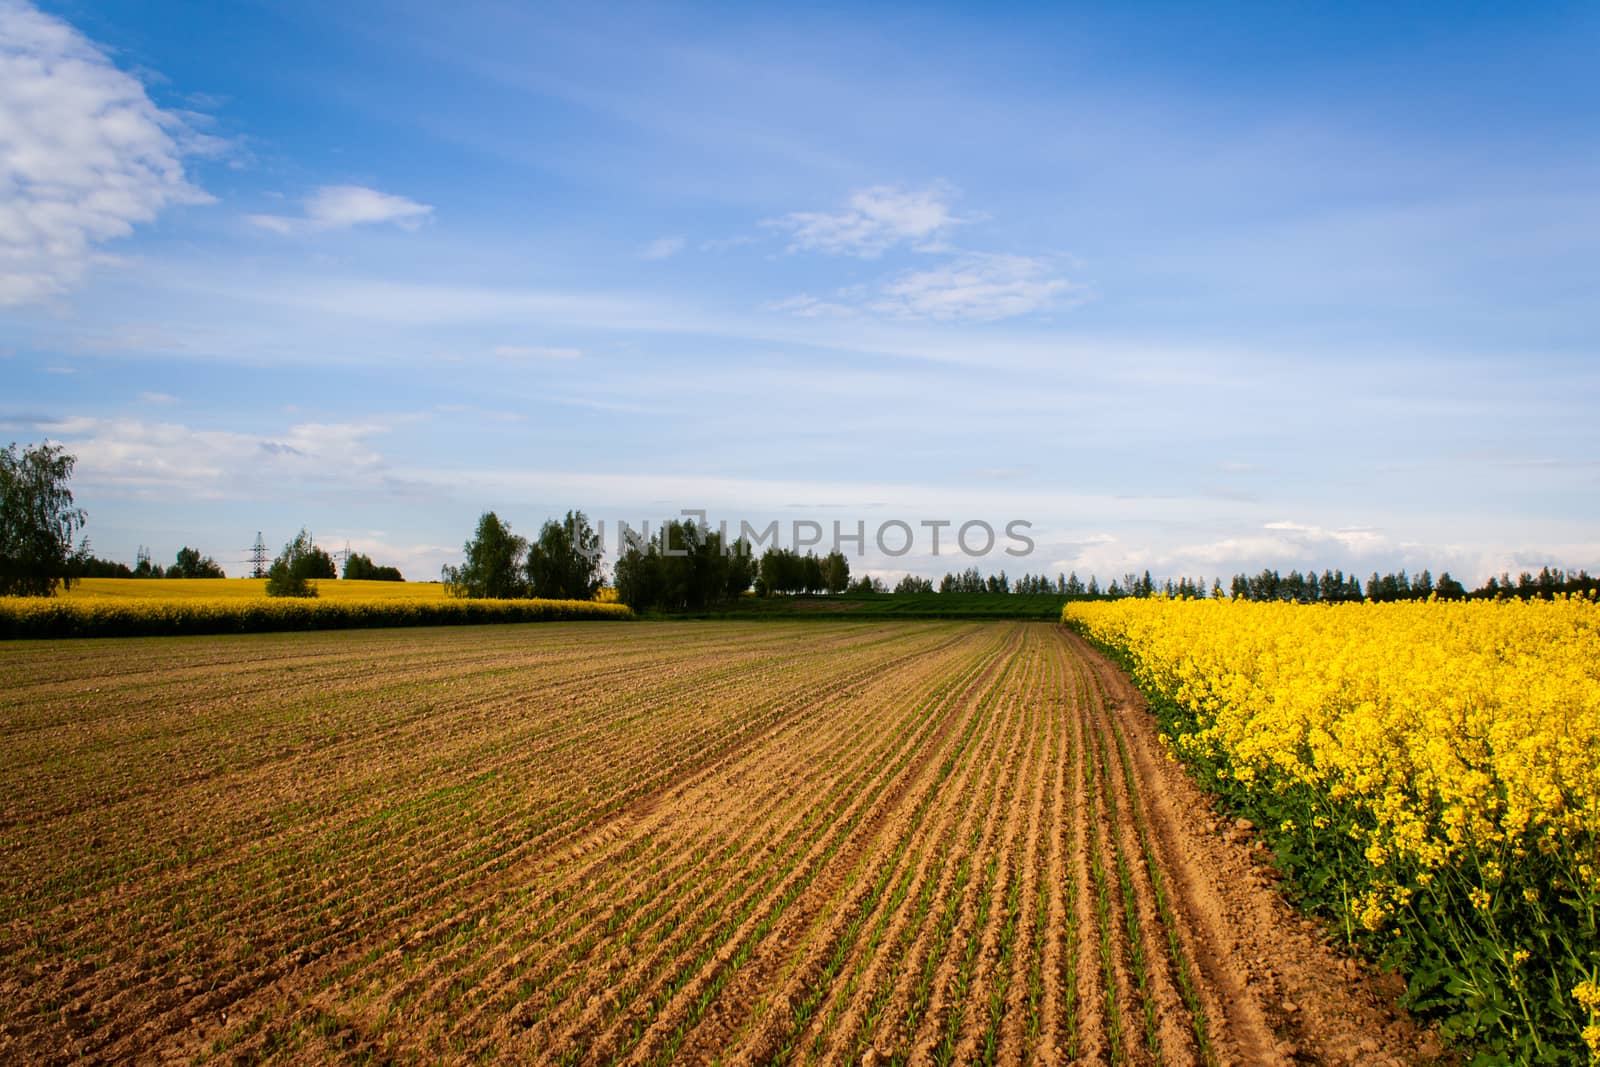 Beautiful image of fields of yellow rape and green wheat Green meadow, forest. Cultivation of agricultural crops. Spring sunny landscape with blue sky. Wallpaper of nature